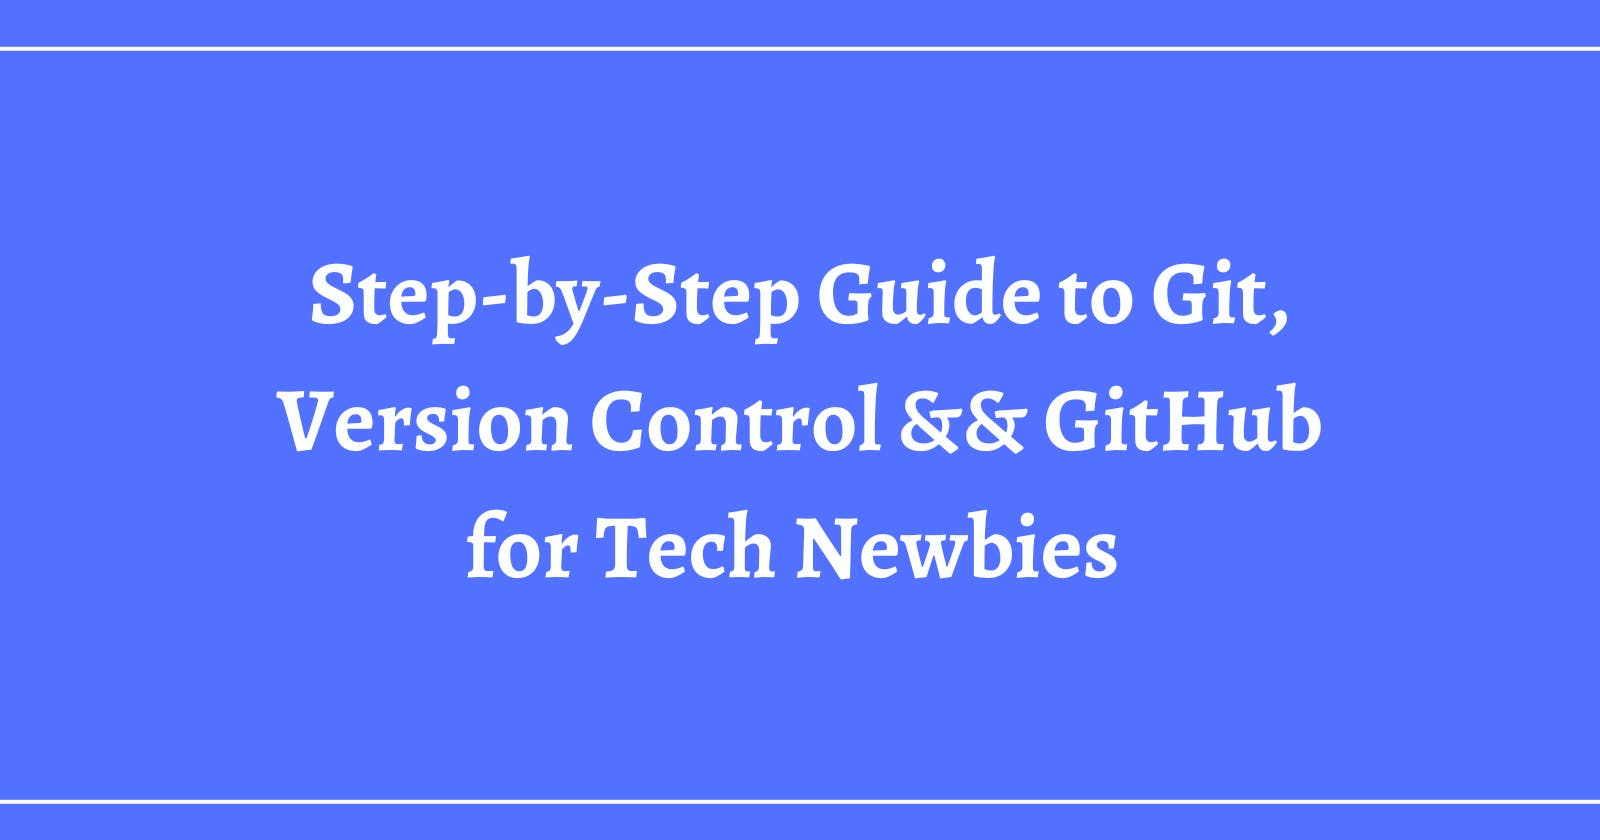 Step-by-Step Guide to Git, Version Control && GitHub for Tech Newbies